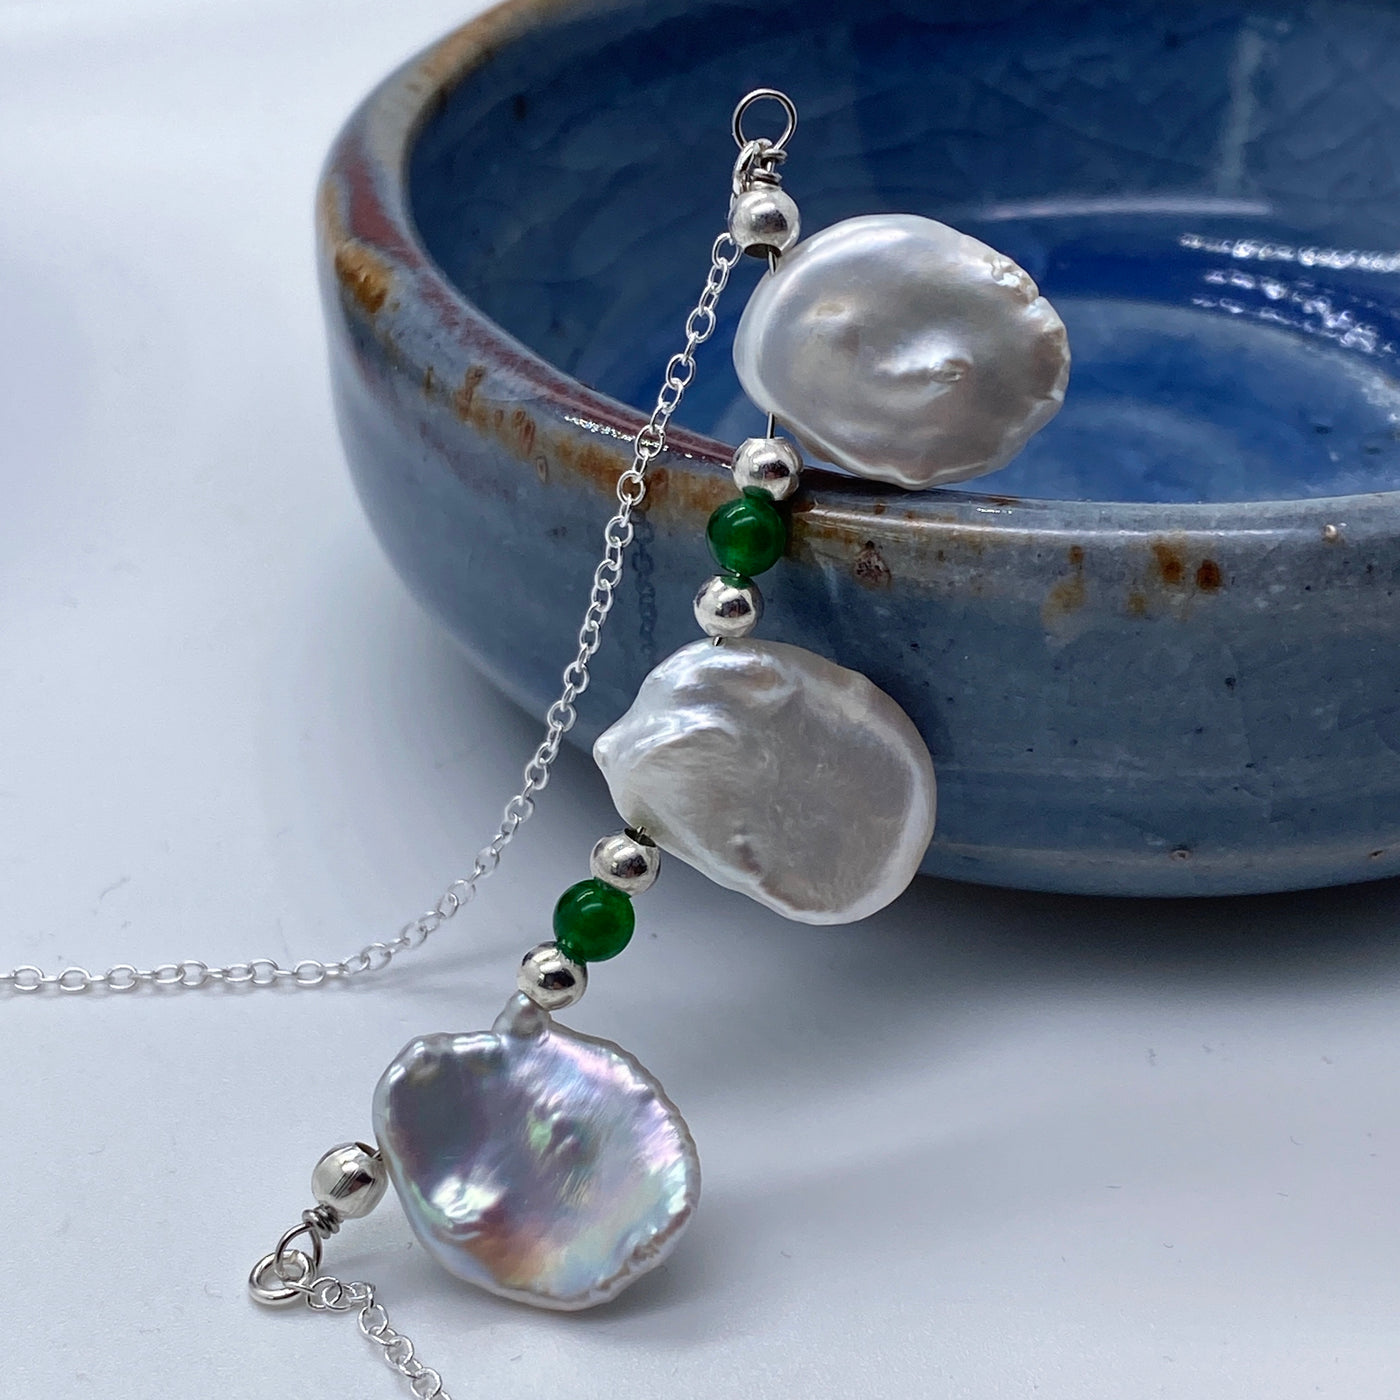 Baroque and green calchedony necklace 1. Baroque flat freshwater pearls and green calchedony on silver chain.